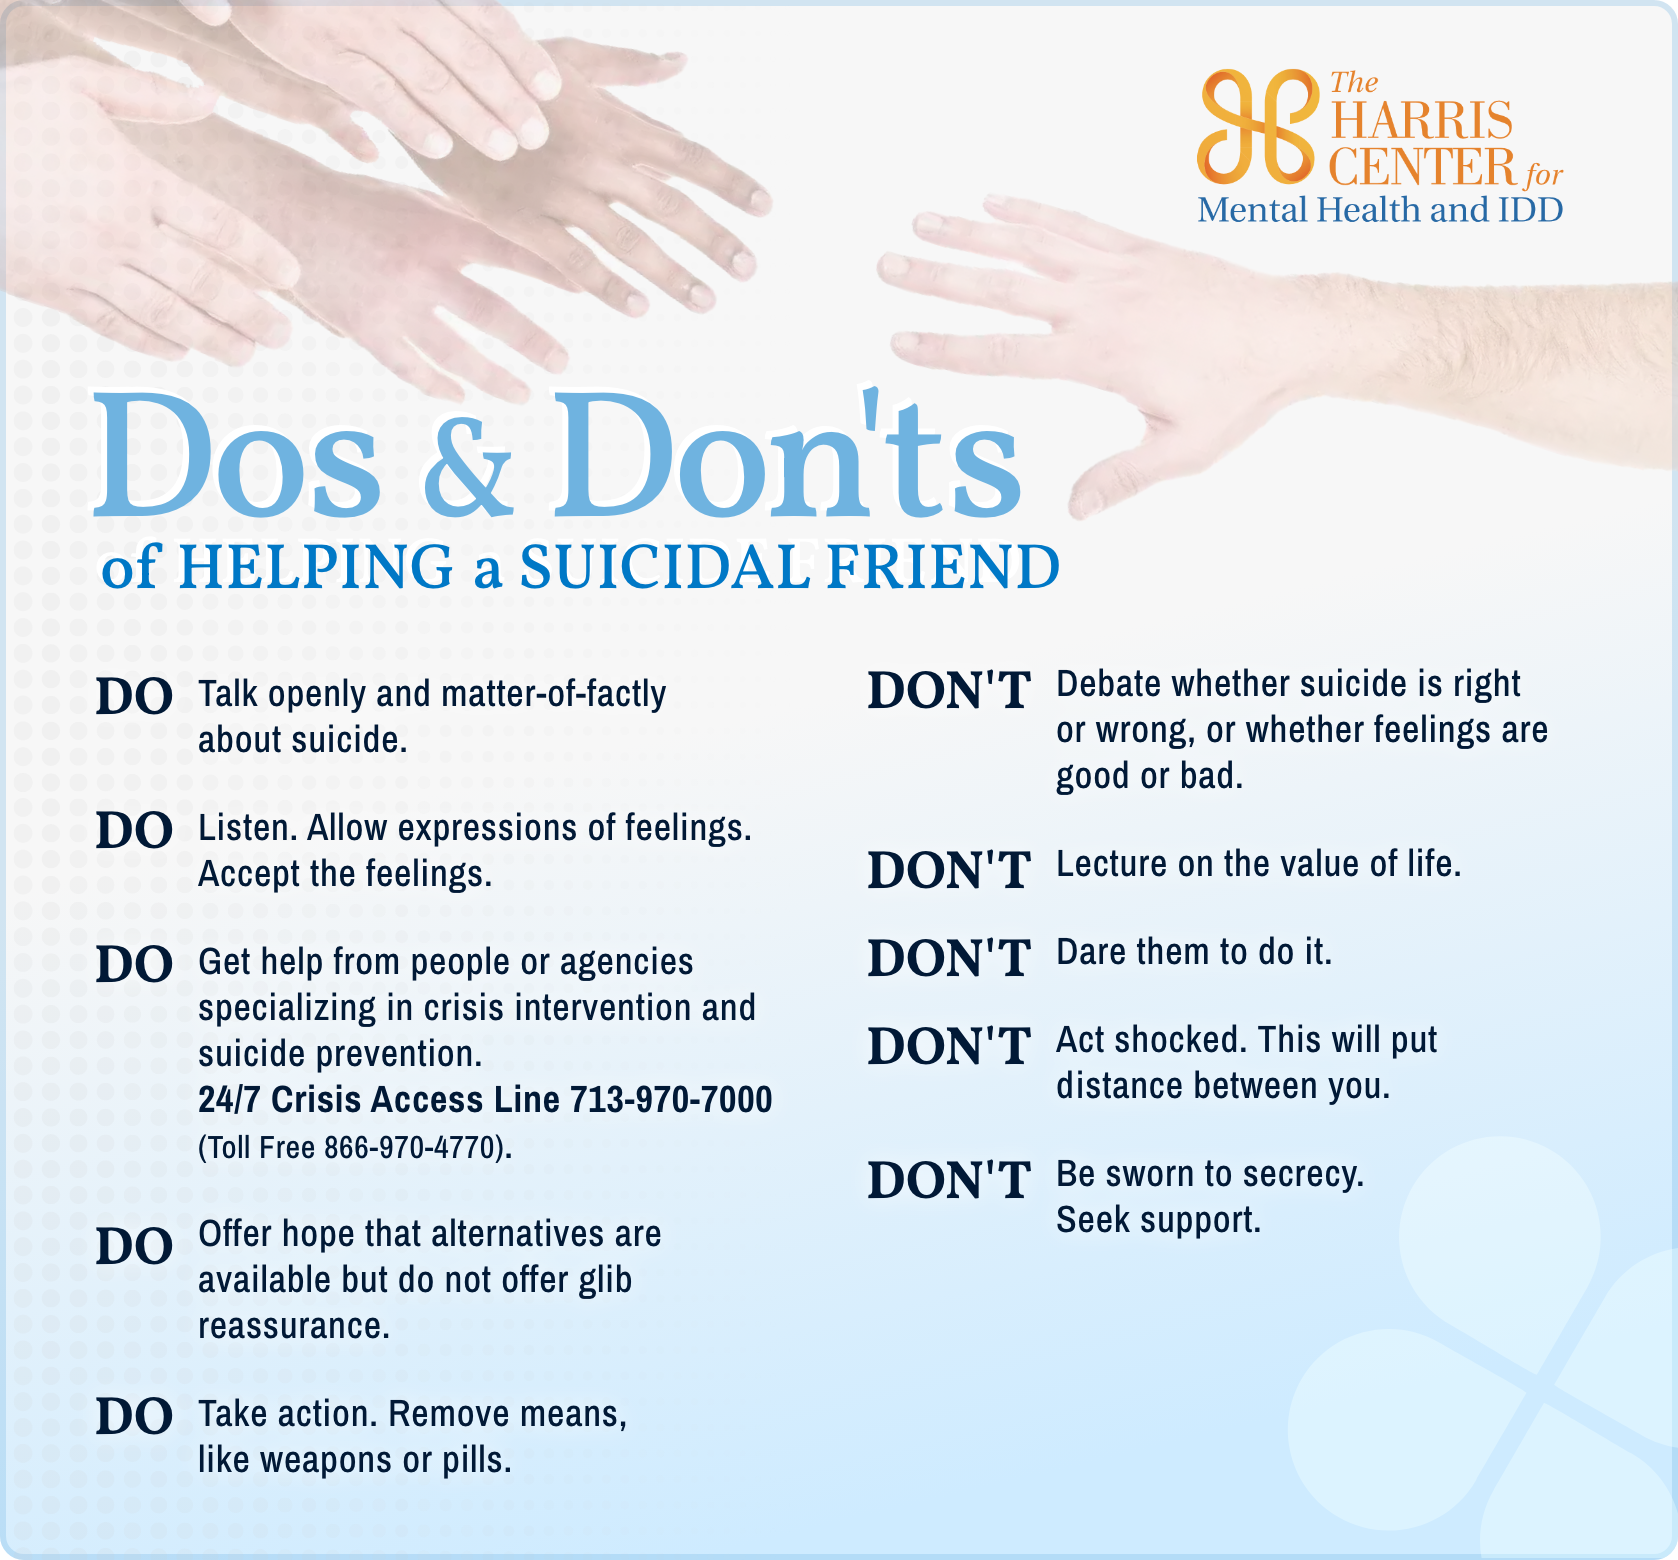 Dos and Don'ts of helping a suicidal friend